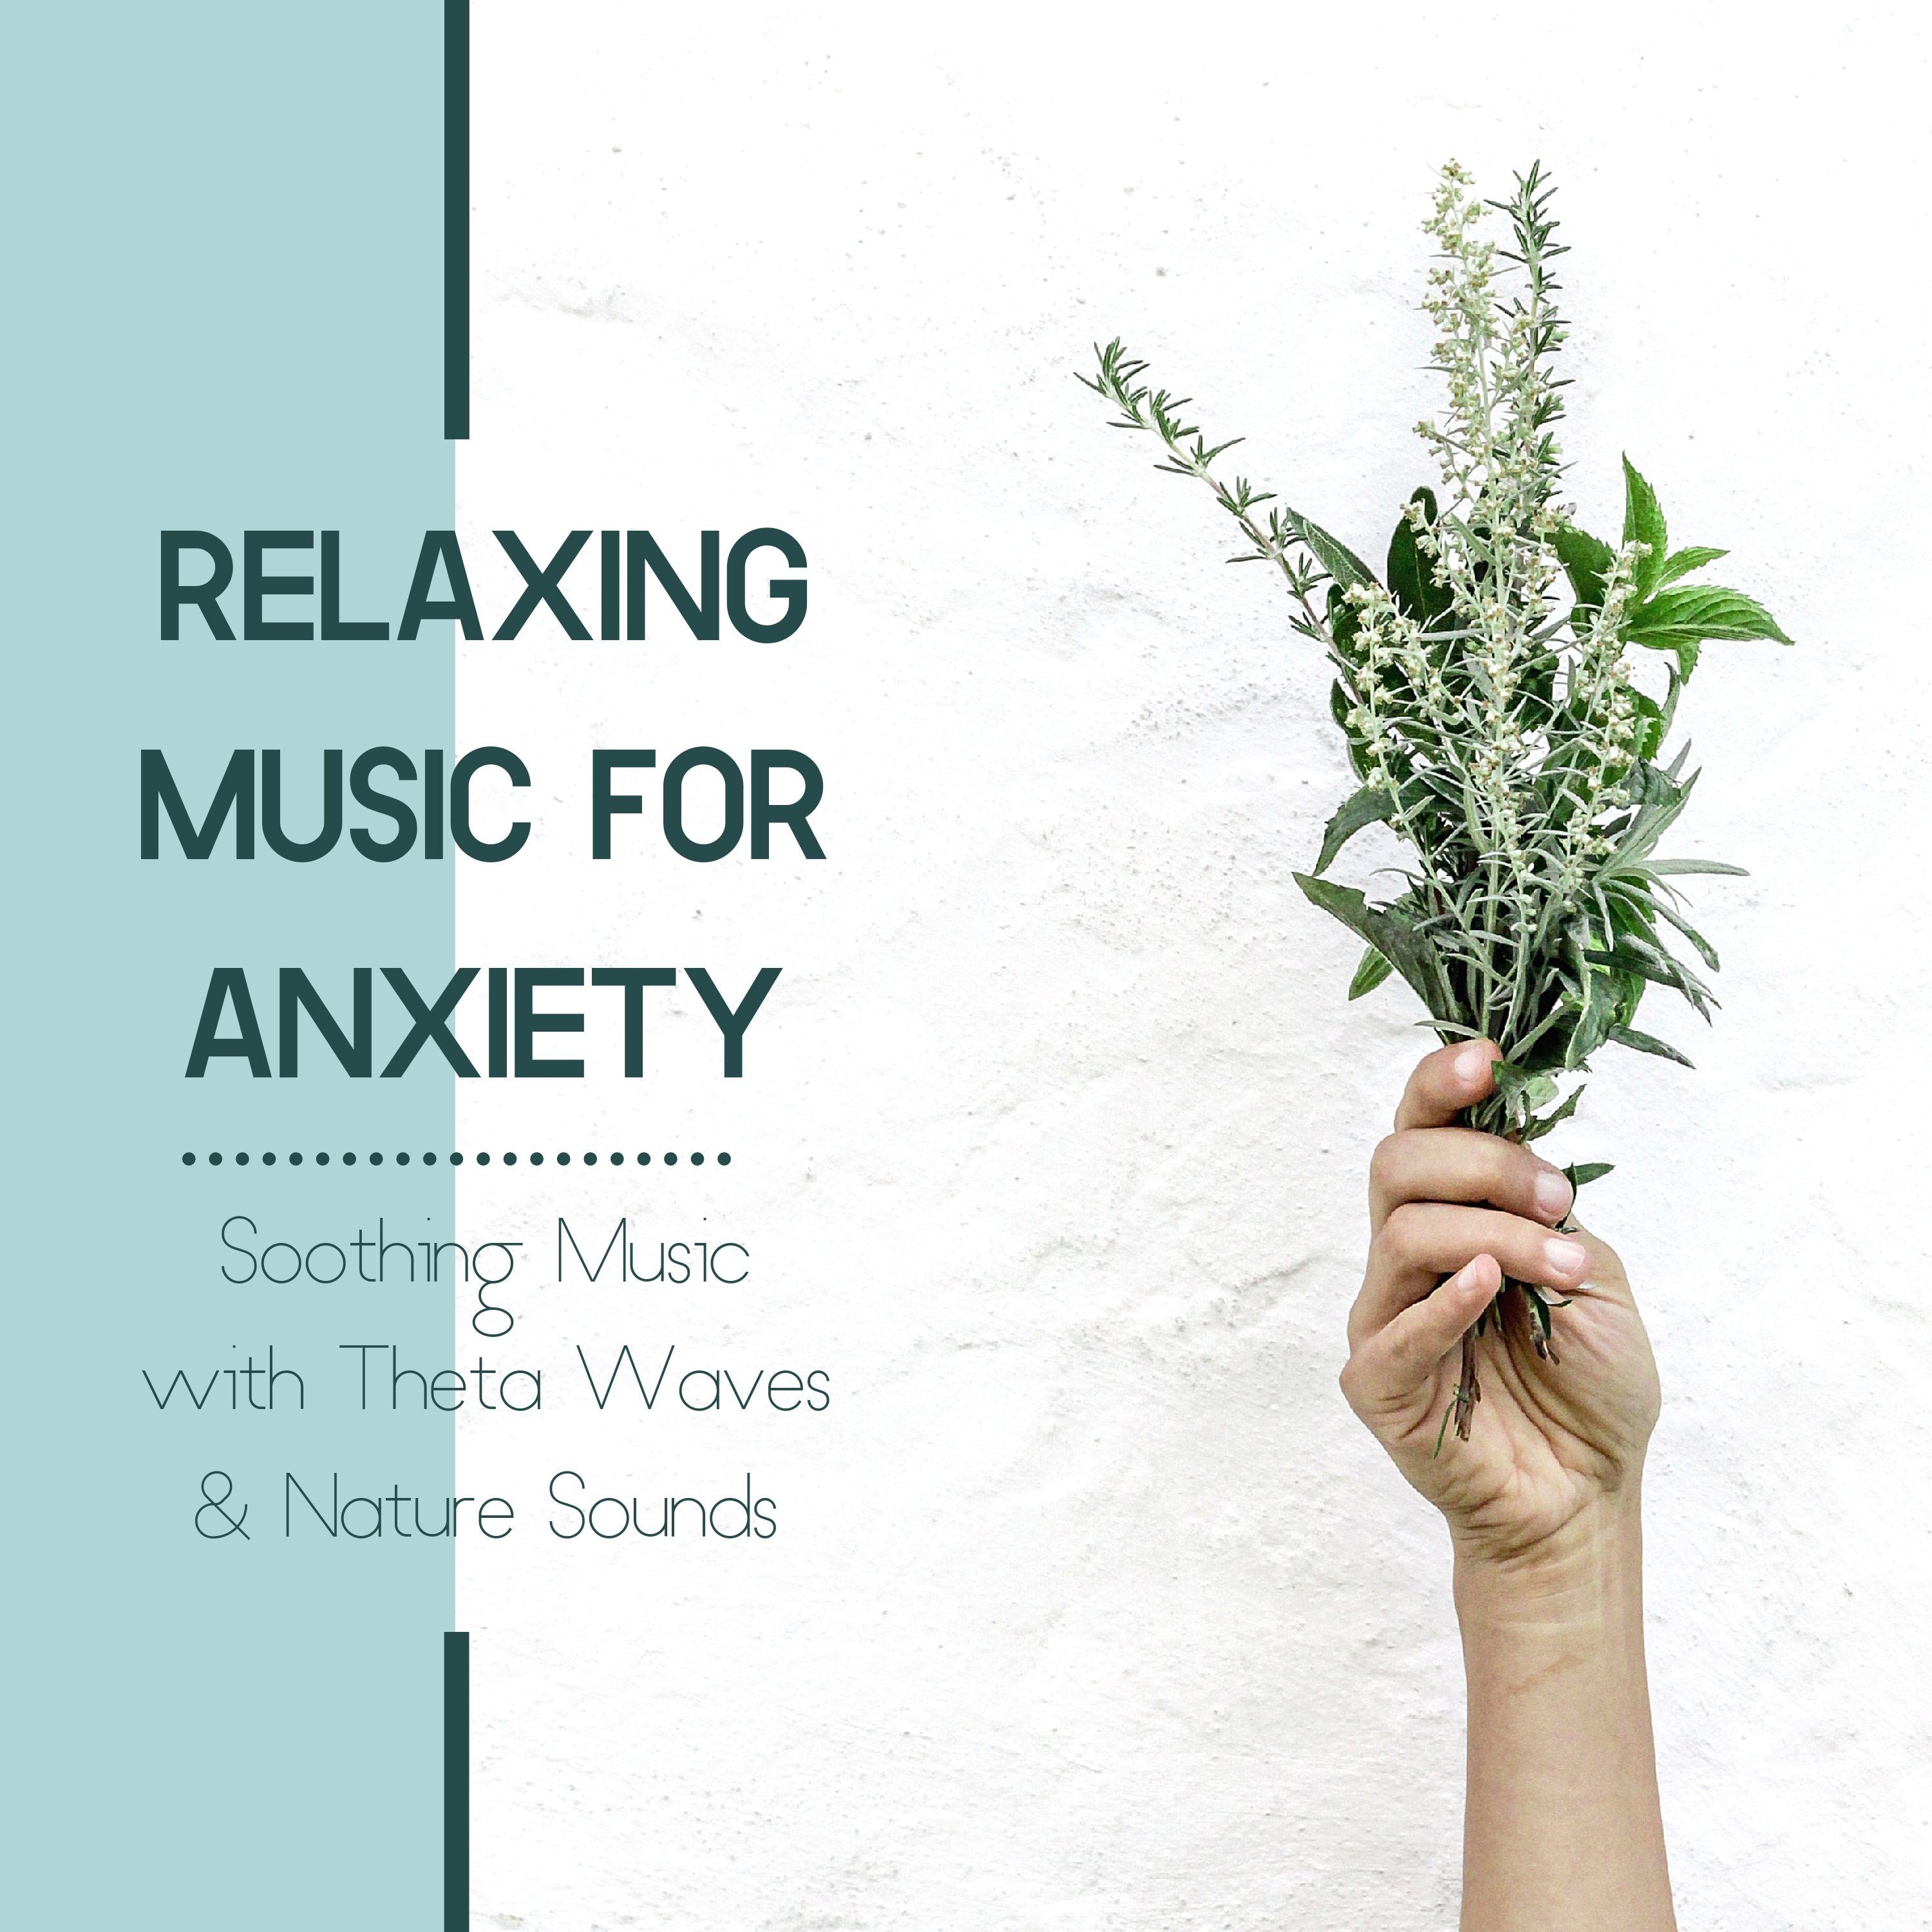 Relaxing Music for Anxiety - Soothing Music with Theta Waves & Nature Sounds